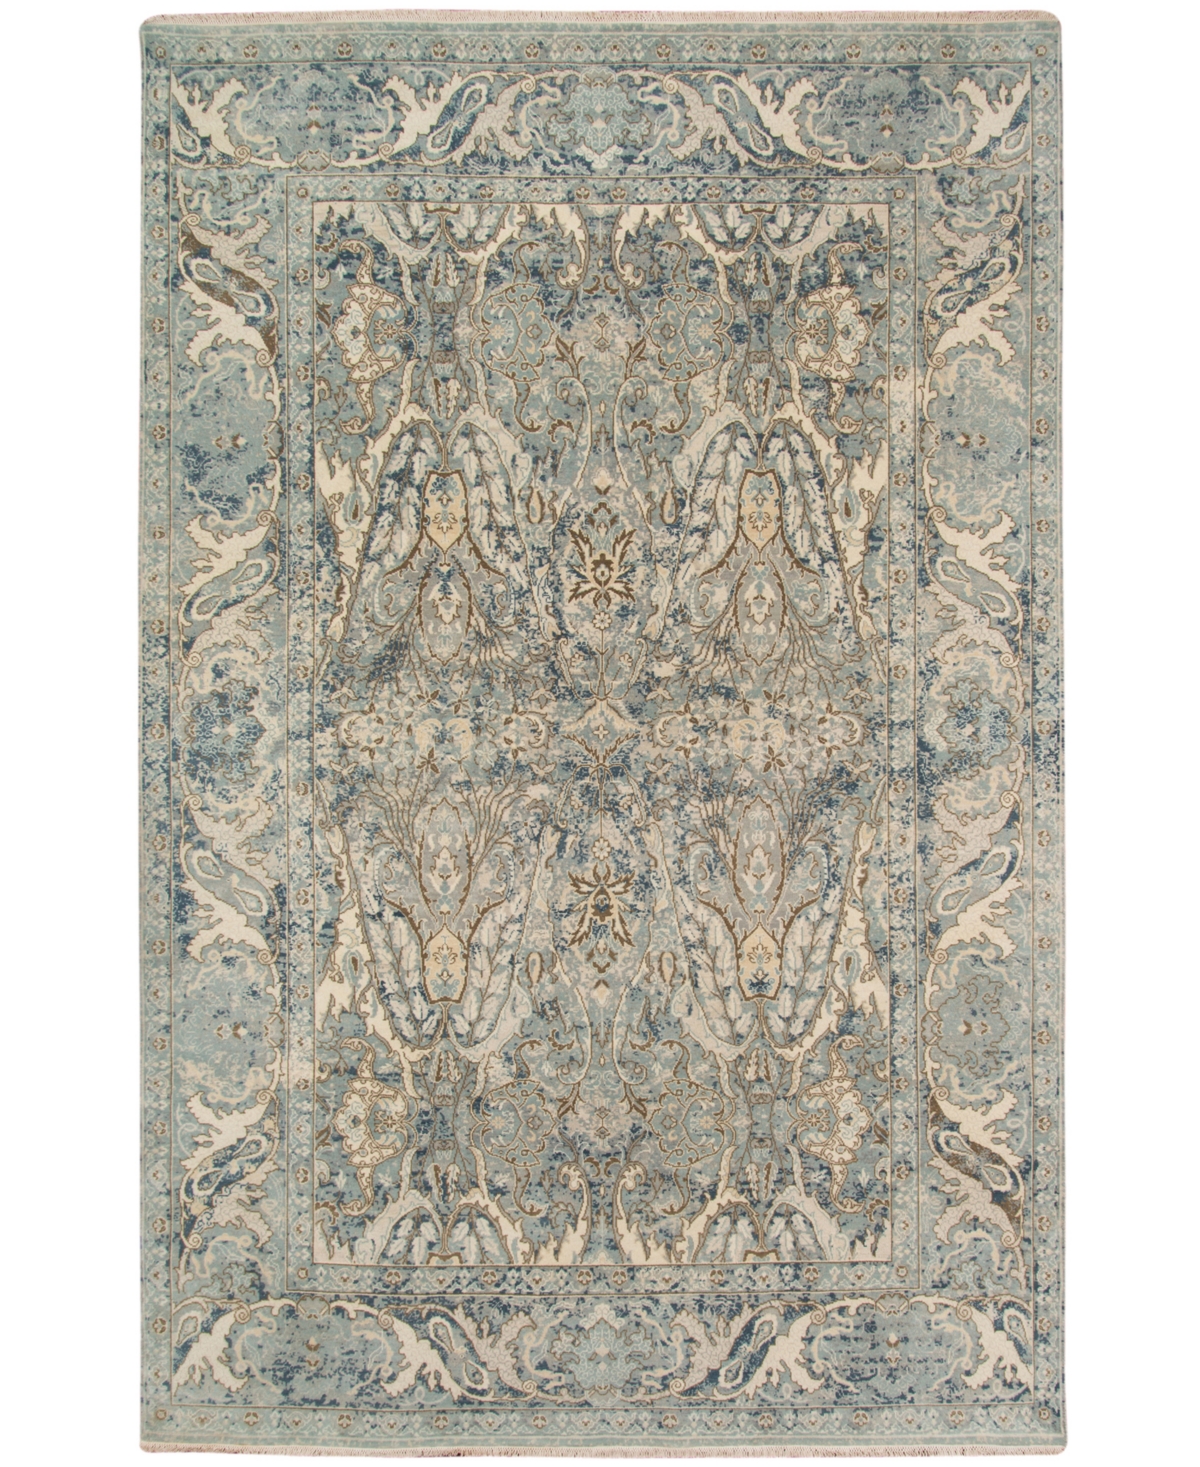 Amer Rugs Vintage-Inspired Pagota 2' x 3' Area Rug - Blue